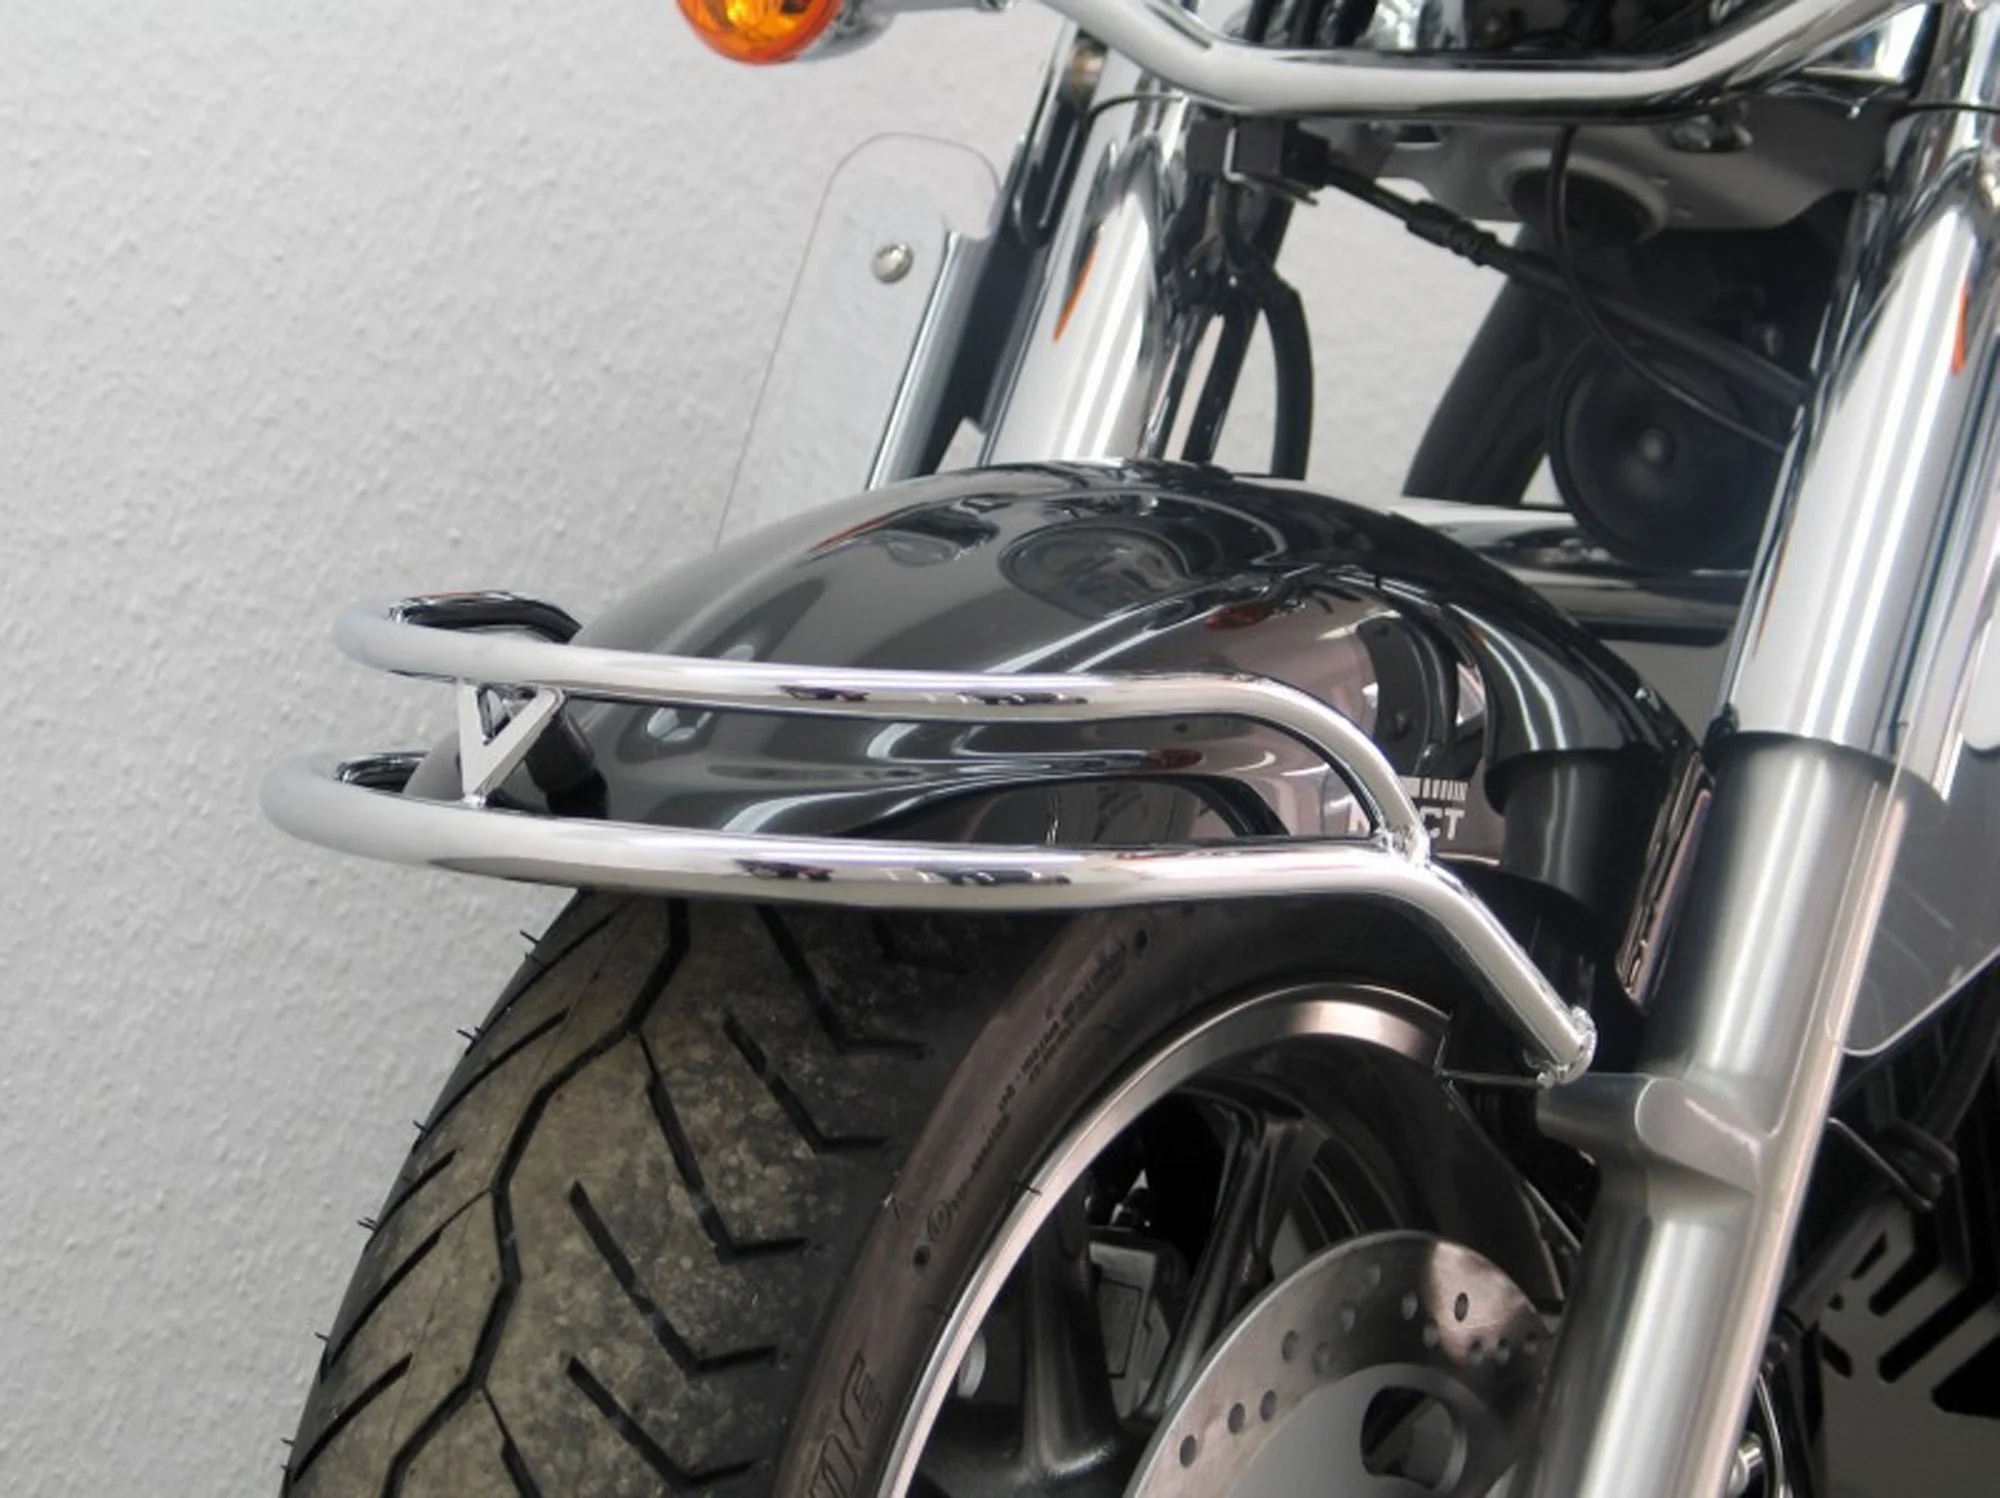 RELING FUER FRONTFENDER